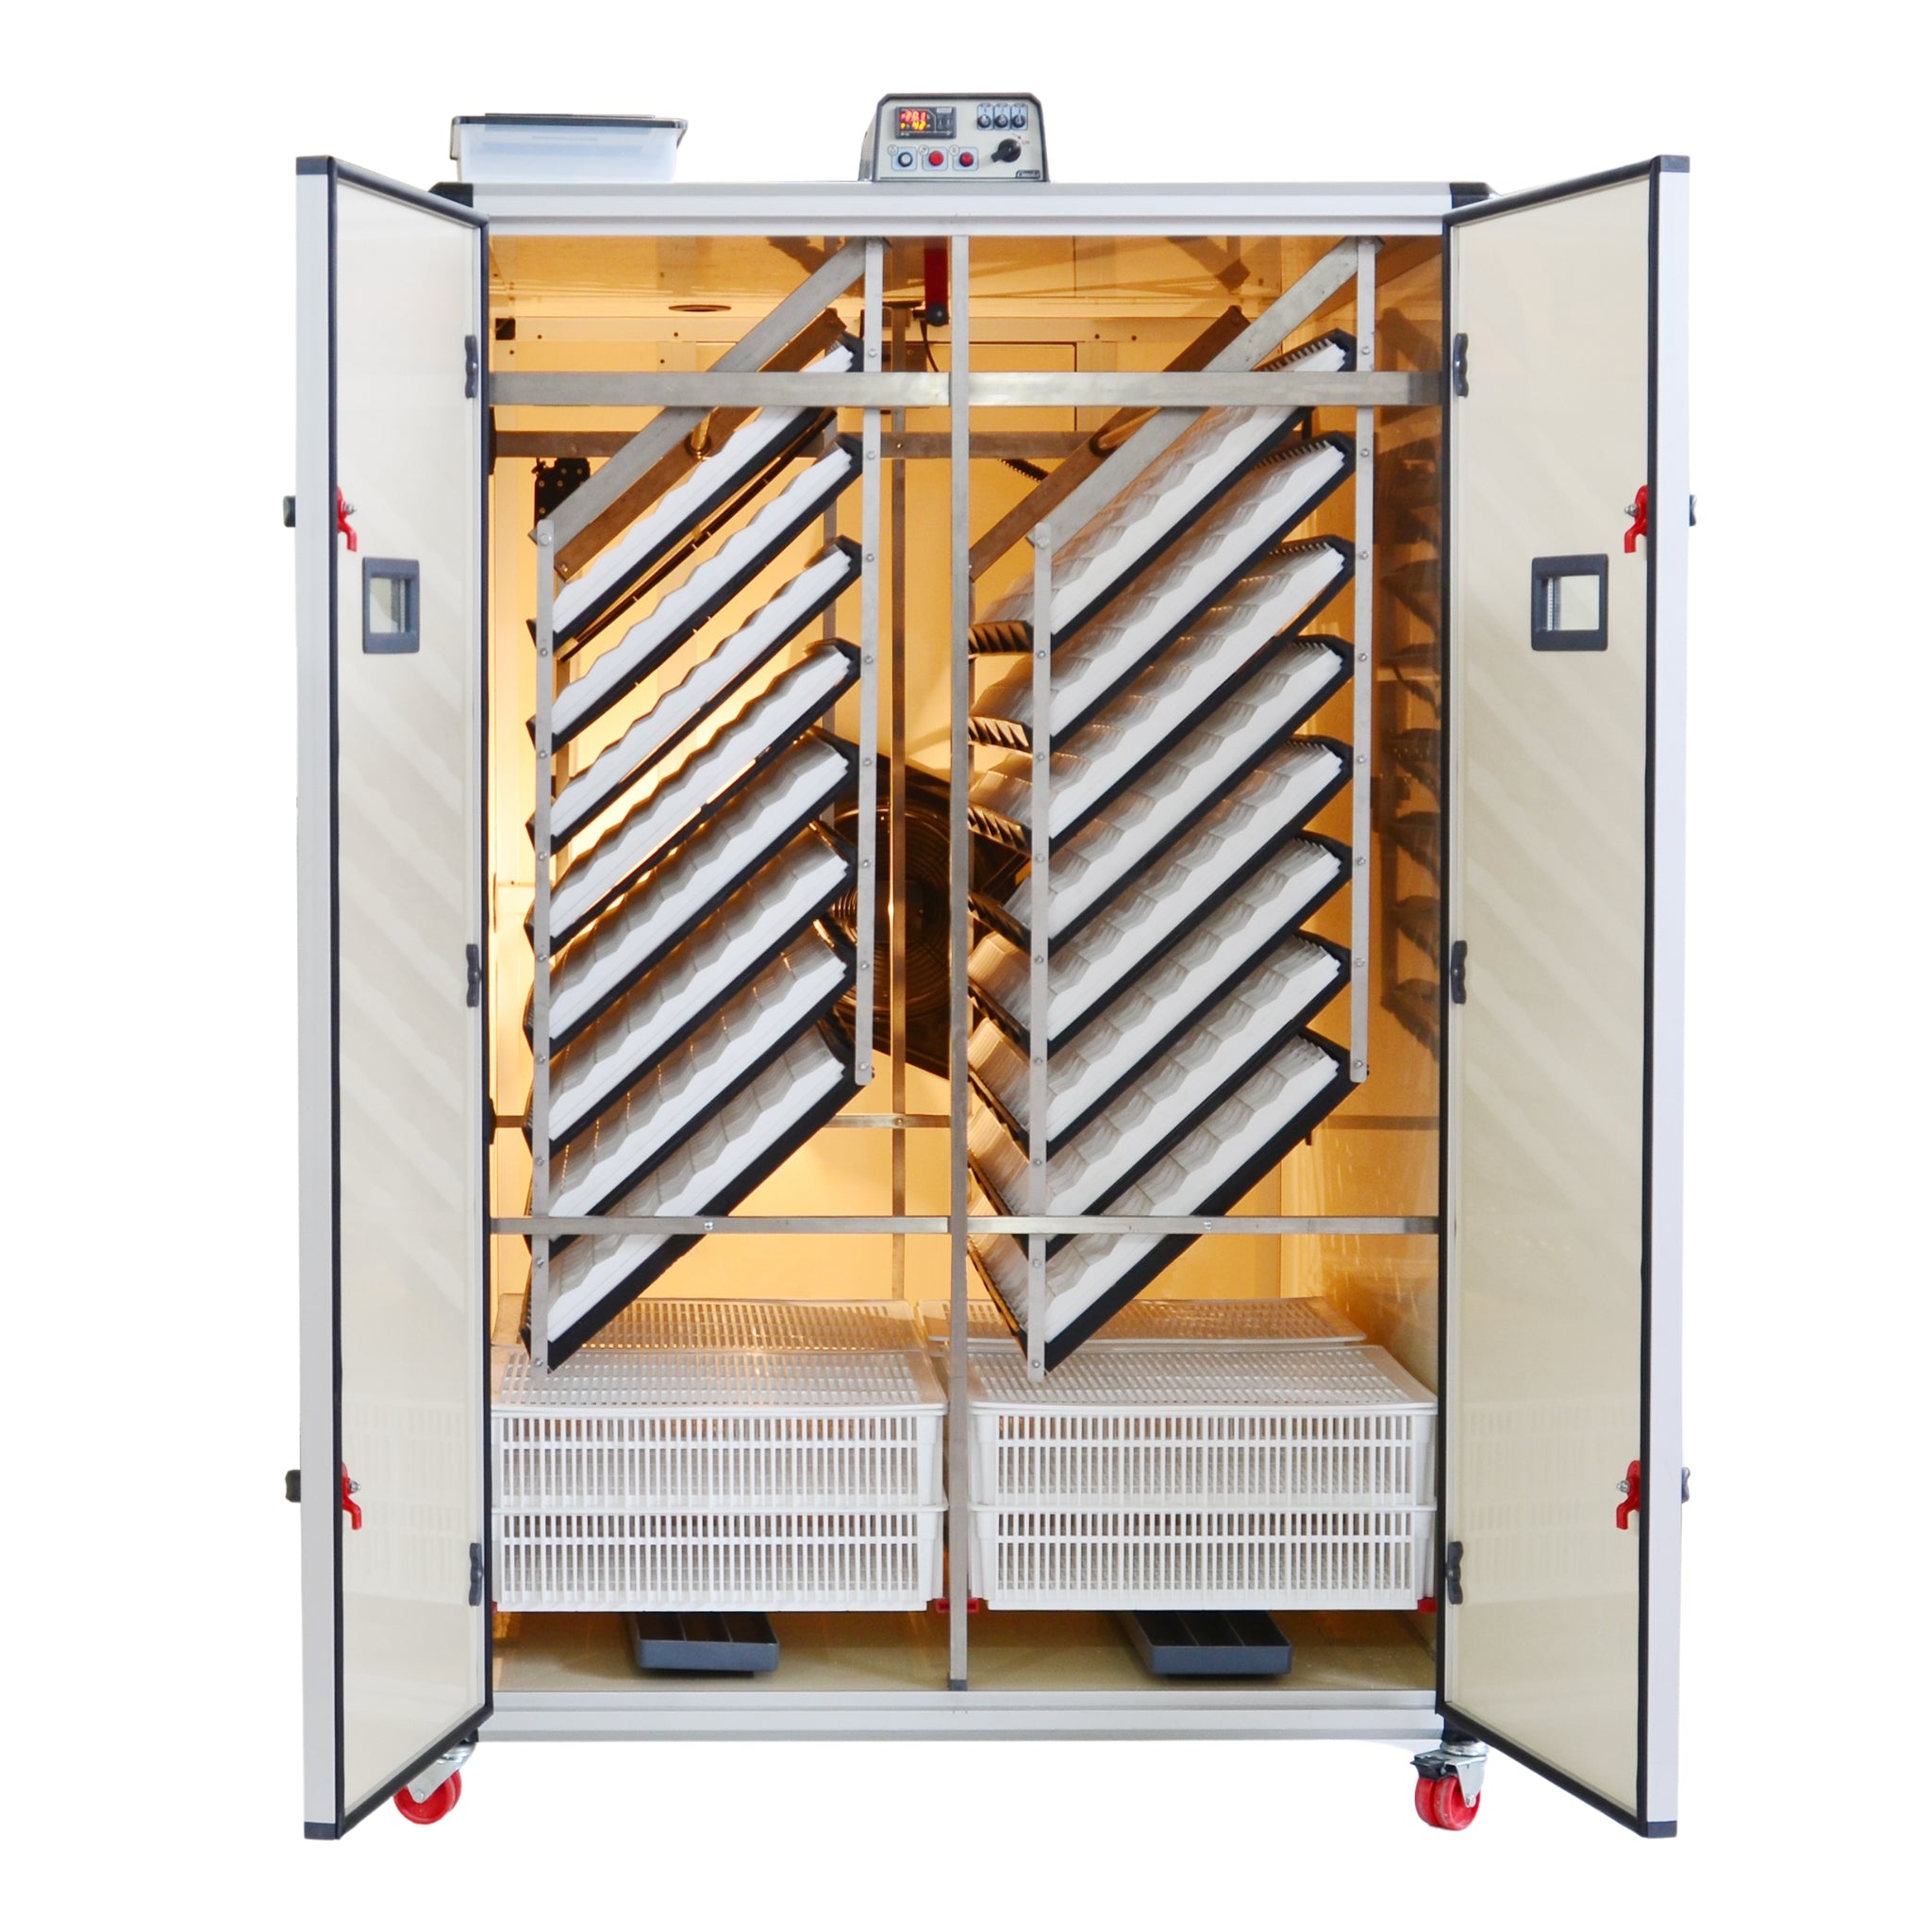 Hatching Time Cimuka 3200C Automatic Egg Incubator shown with doors open showing lighted interior with 16 setting trays and 4 hatching baskets inside. Digital control panel on top of incubator.